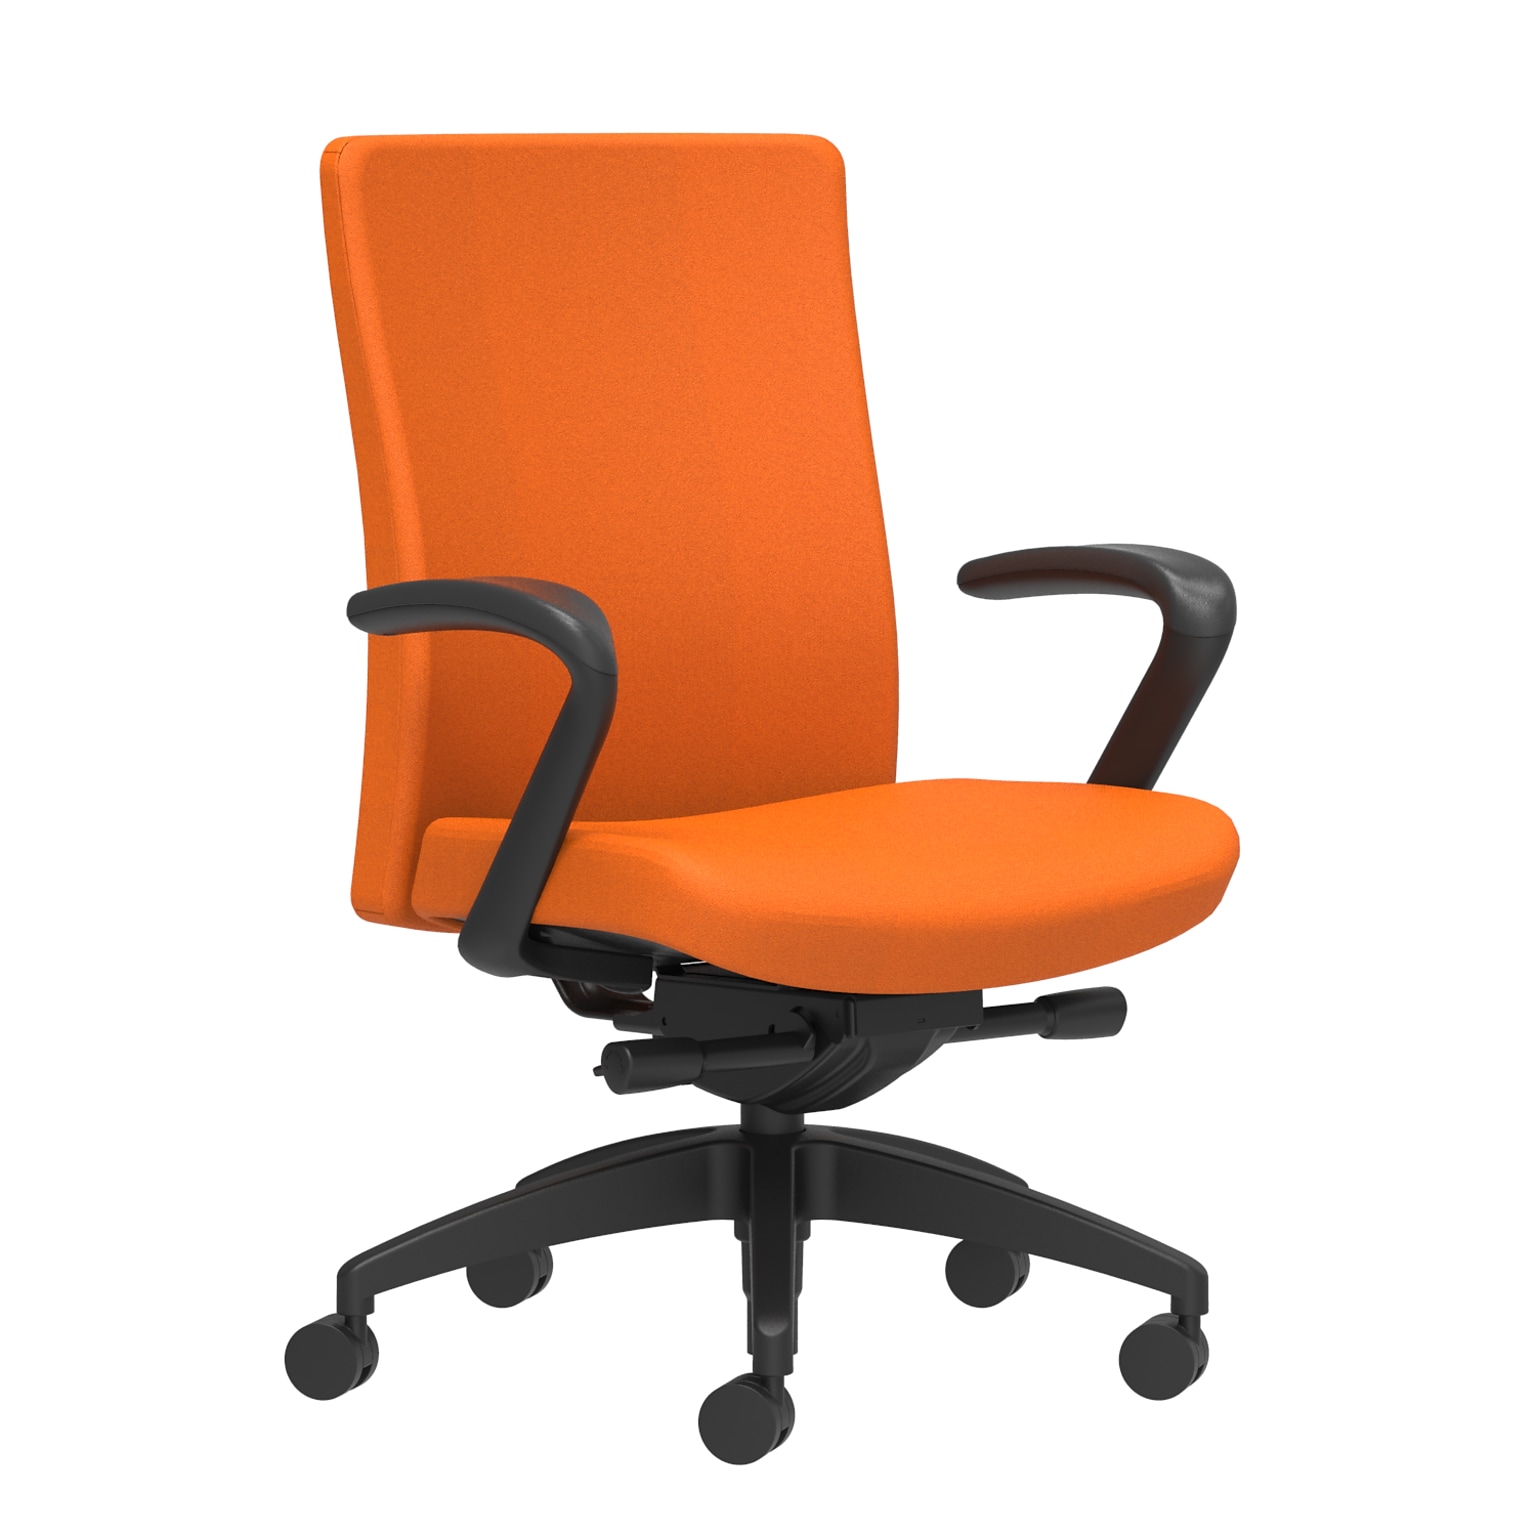 Union & Scale Workplace2.0™ Task Chair Upholstered, Fixed Arms, Apricot Fabric, Synchro Tilt Seat Slide (54182)